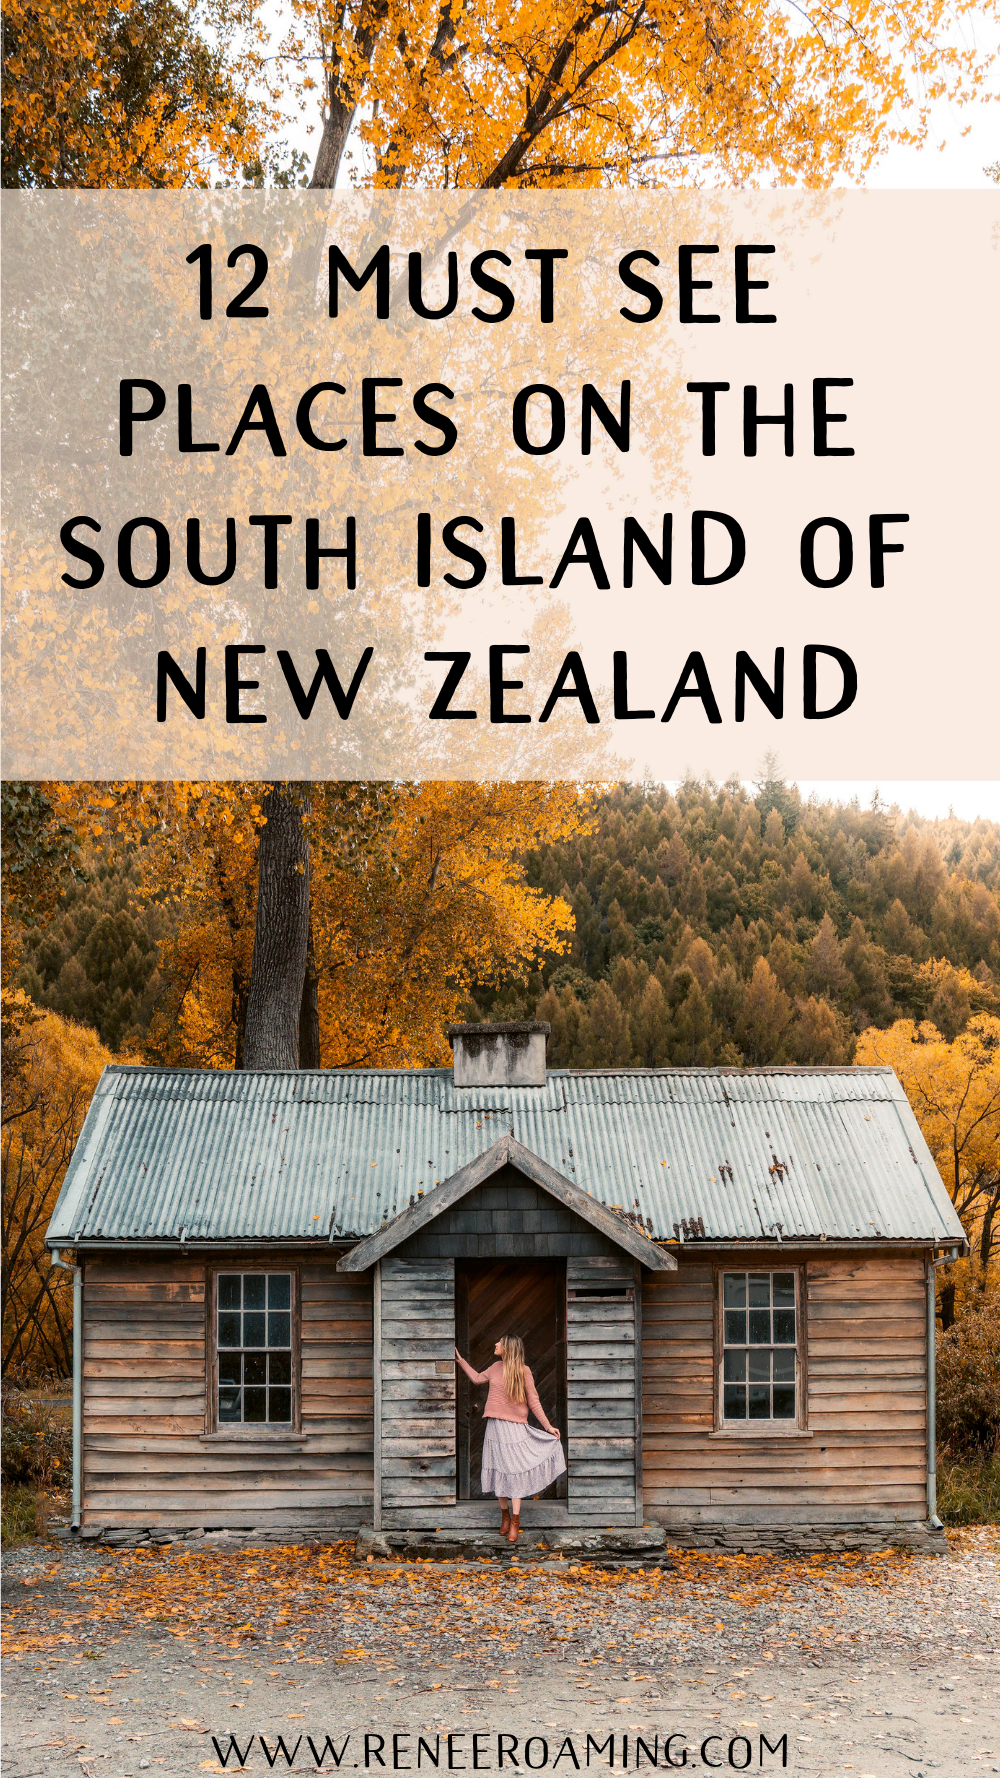 12 MUST SEE PLACES ON THE SOUTH ISLAND OF NEW ZEALAND